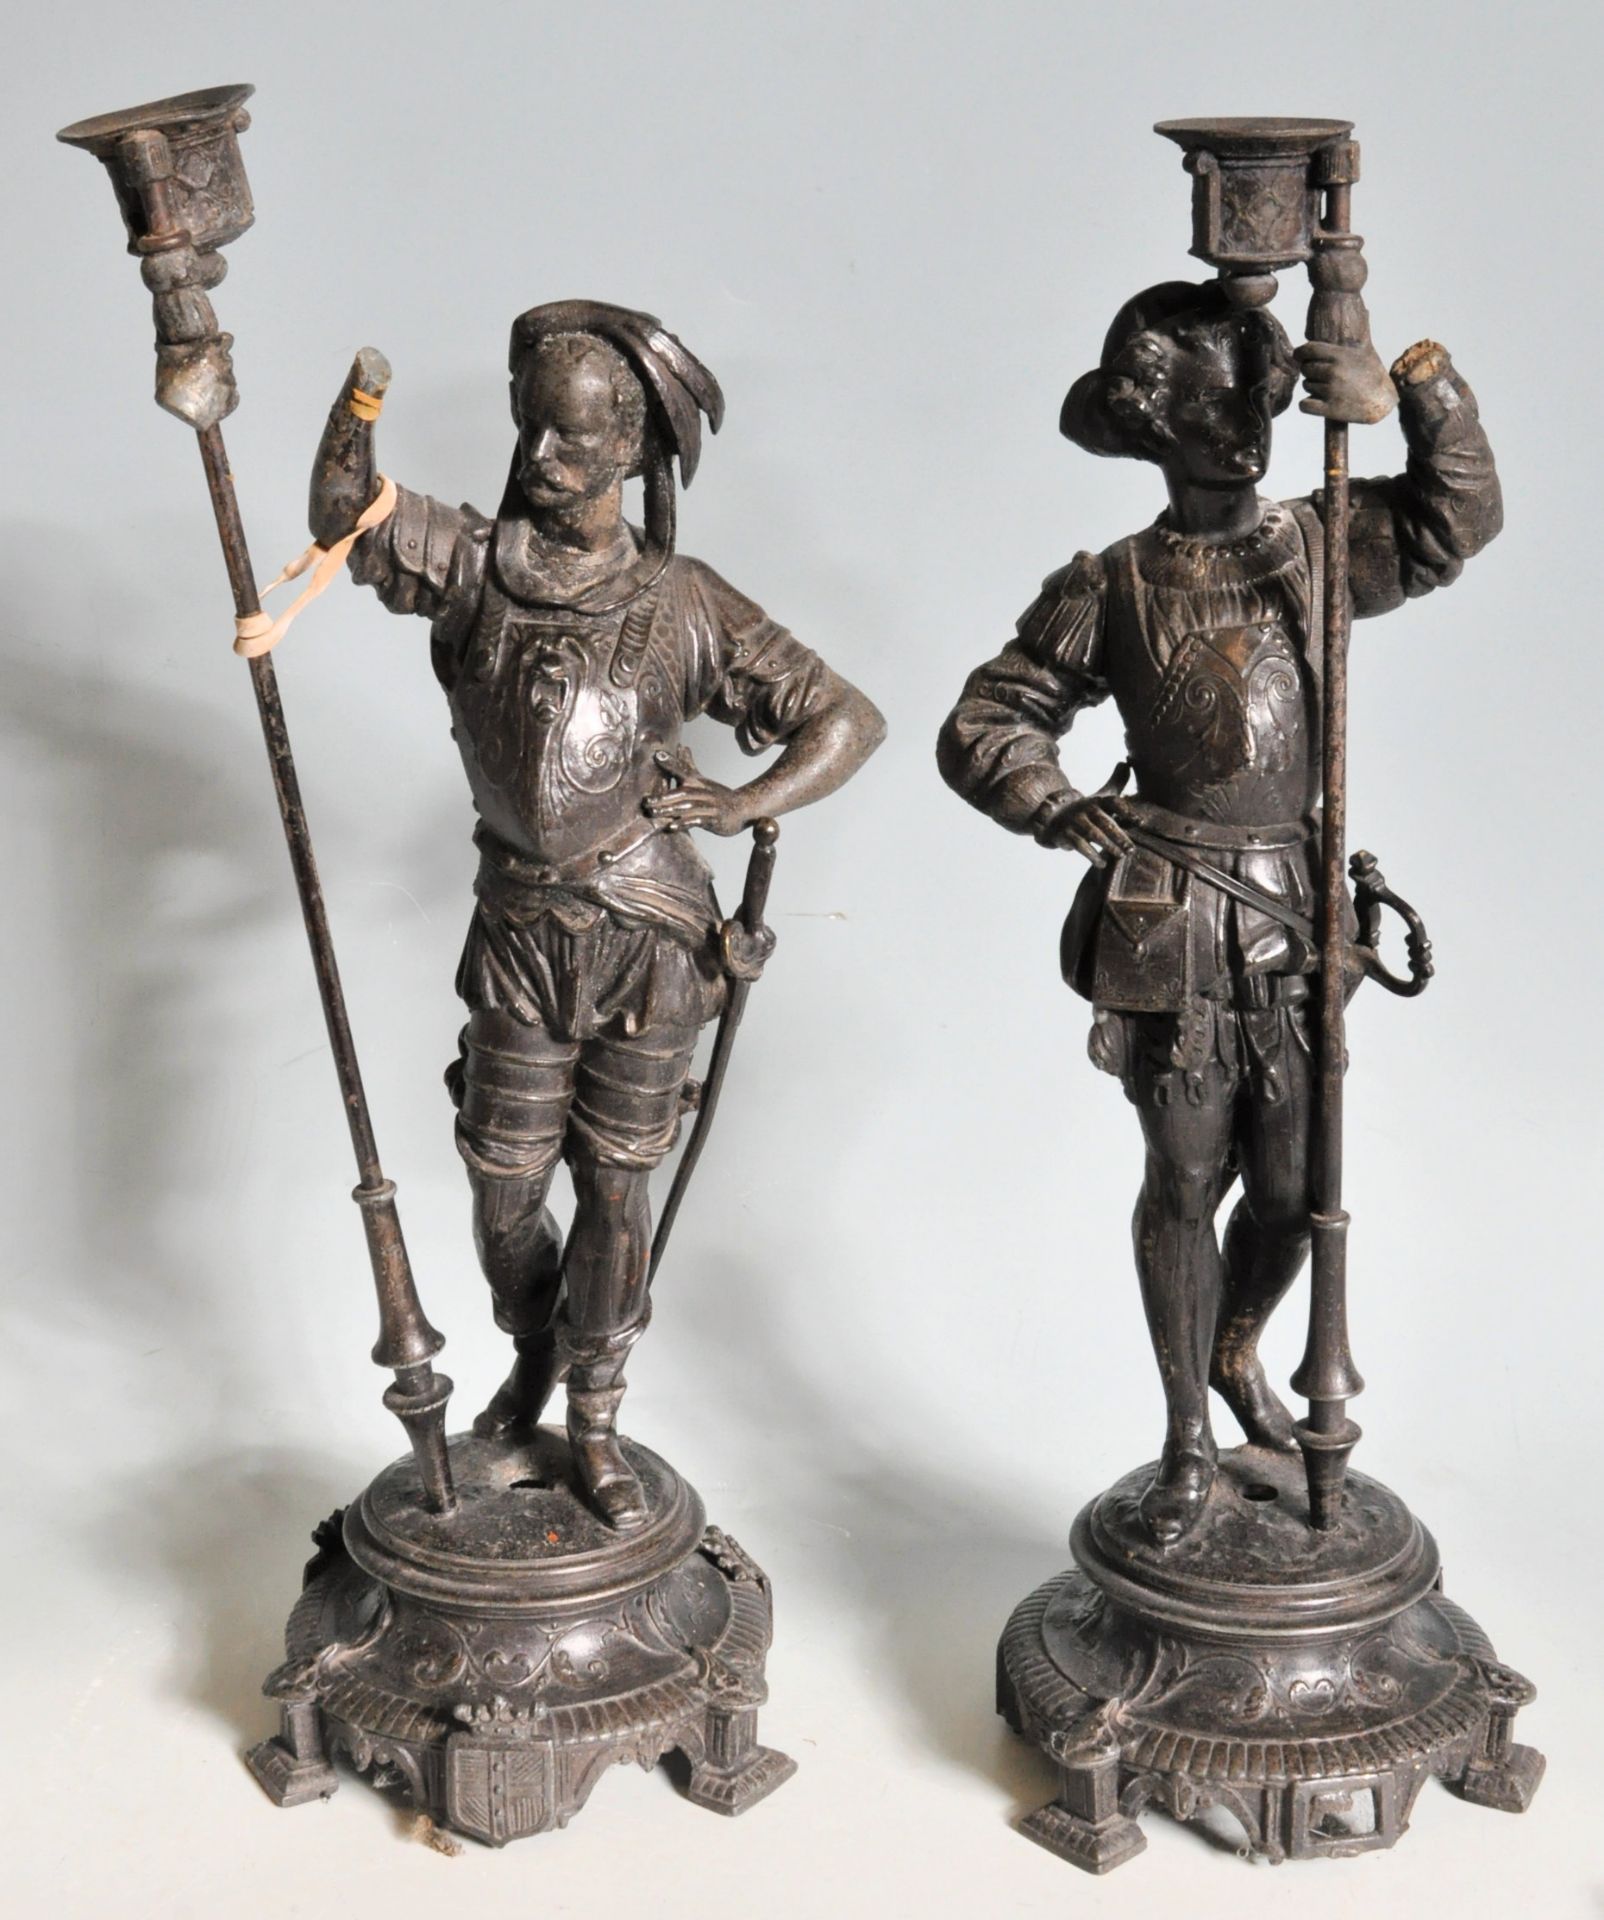 PAIR OF EARLY 20TH CENTURY SPELTER FIGURINES